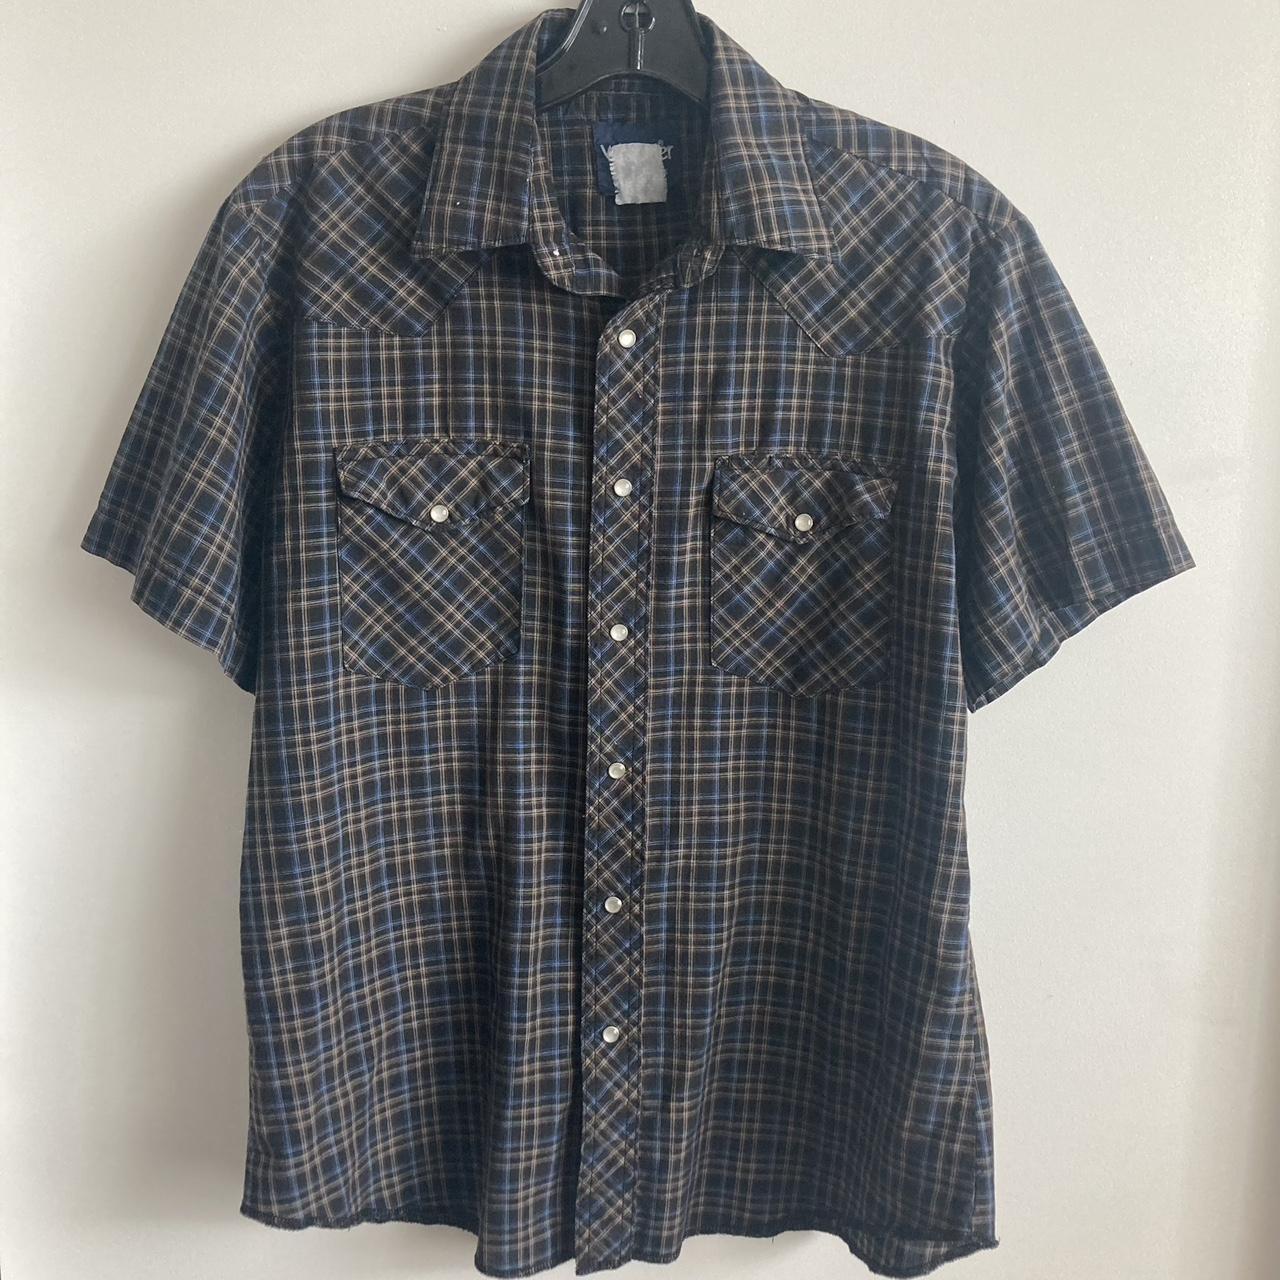 Men's Short Sleeve Button Down Western Shirts Plaid with Pearl Snaps Medium  to 5X 